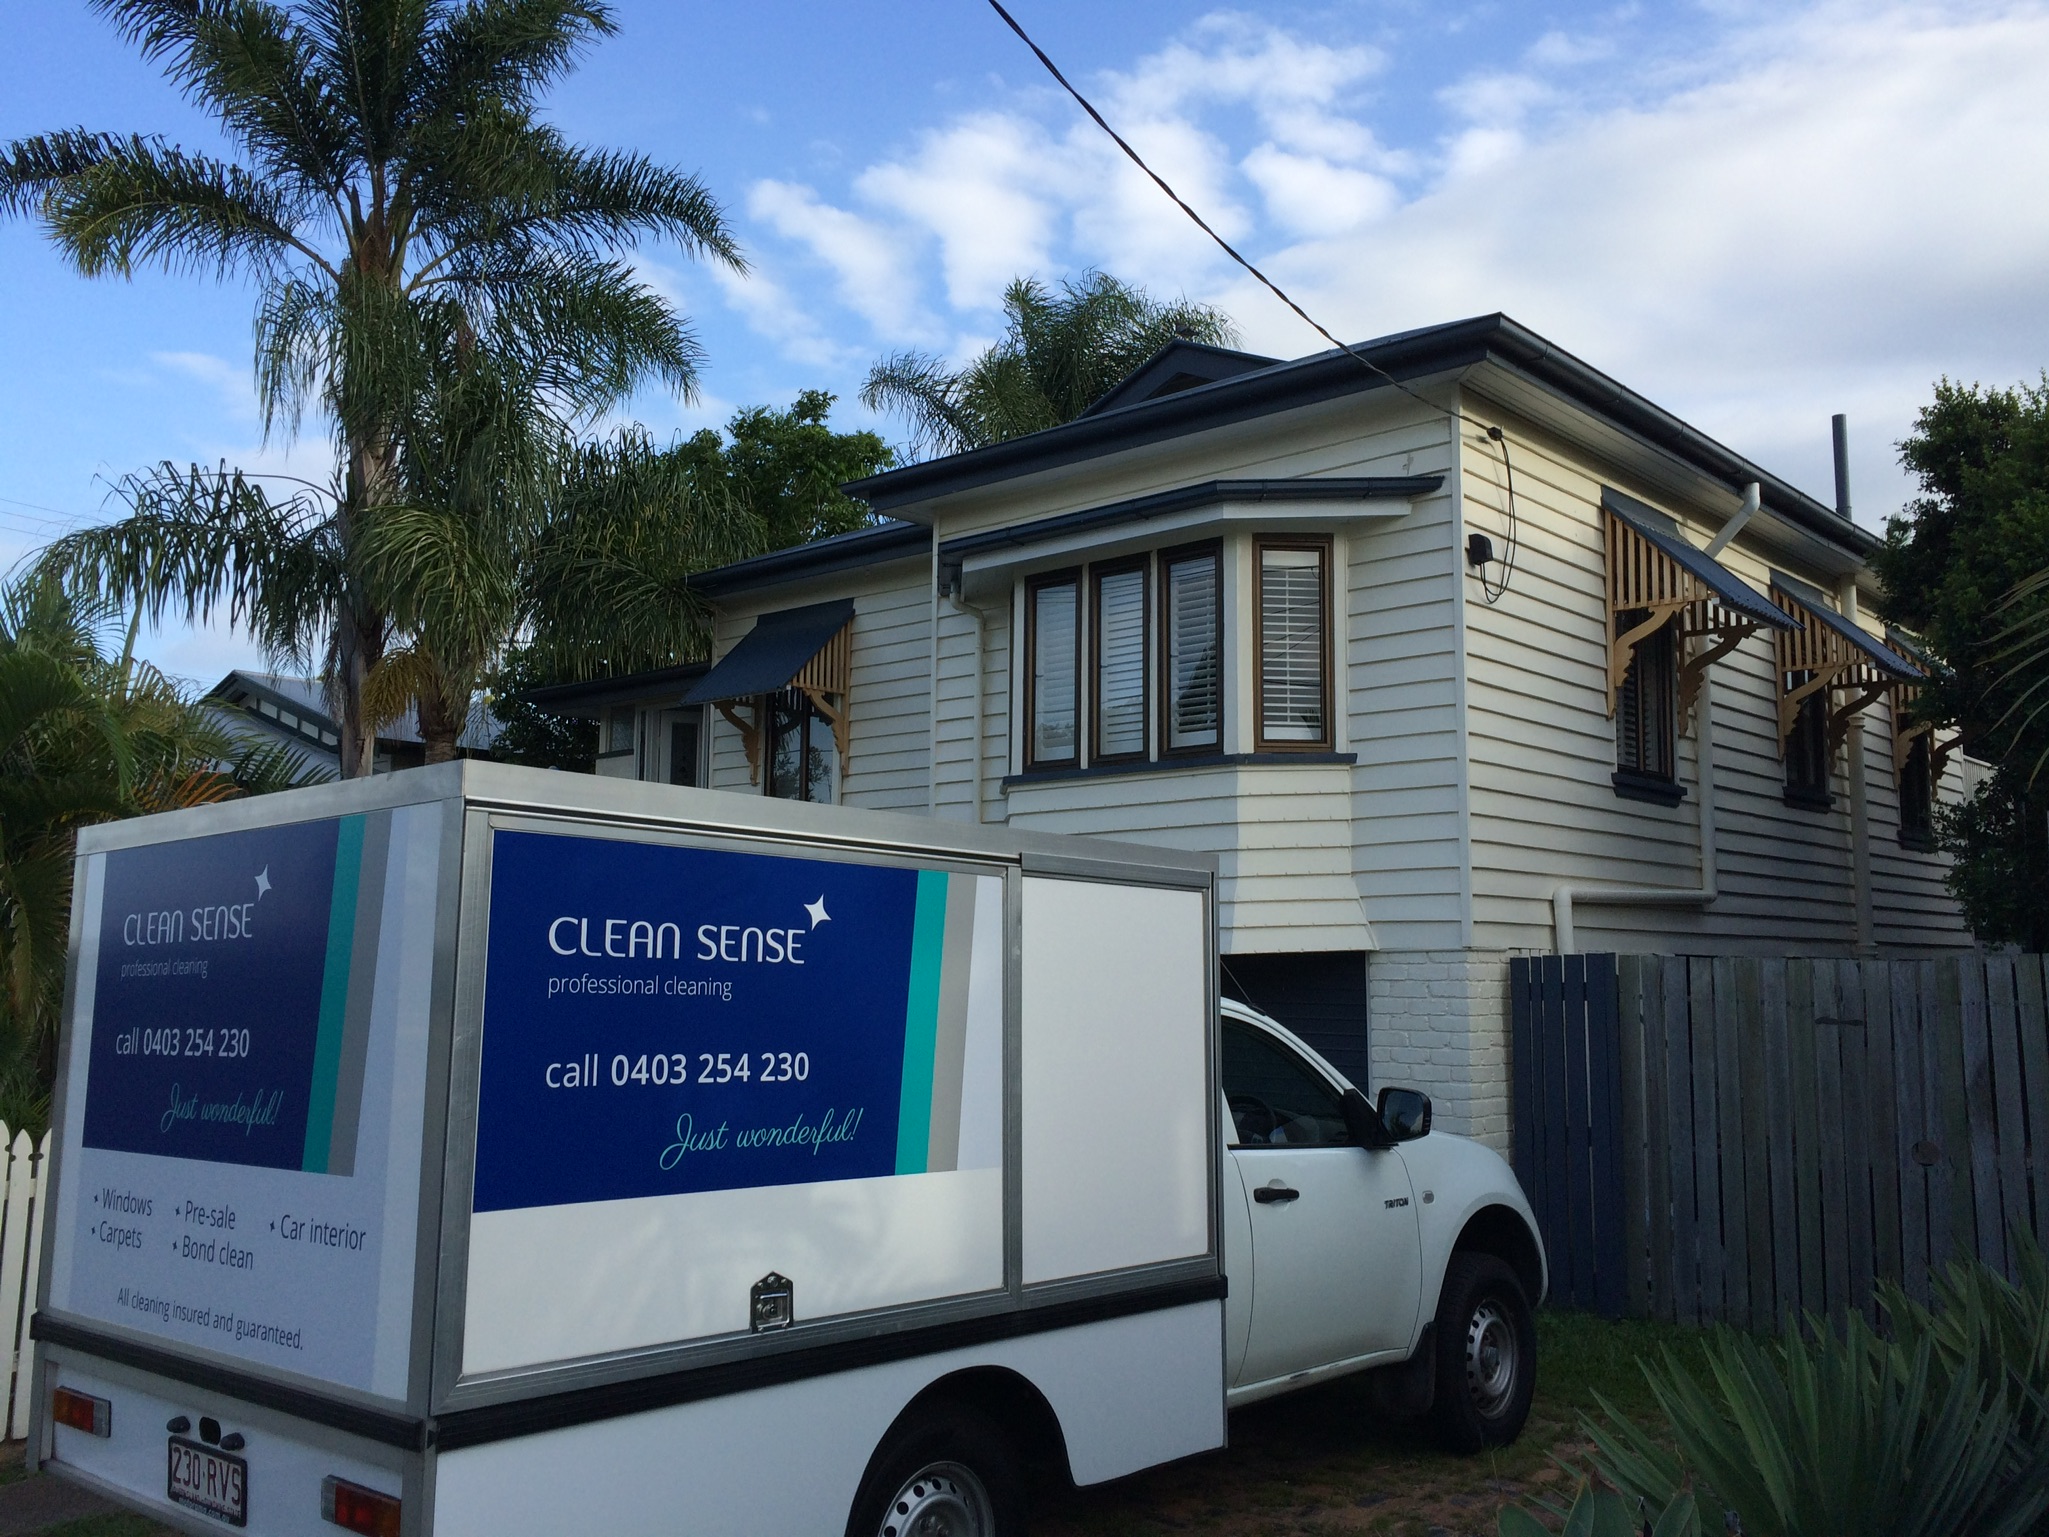 CLEAN SENSE professional carpet cleaning | Zillmere, Queensland 4034 | +61 403 254 230